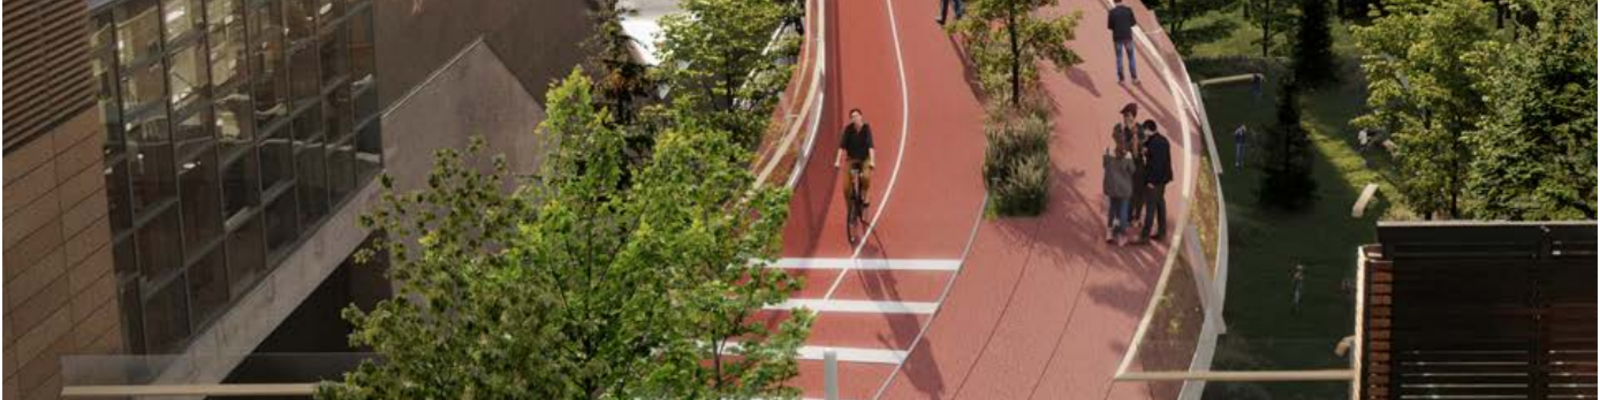 Rendering depicting a person on a bike and people walking along a multipurpose path